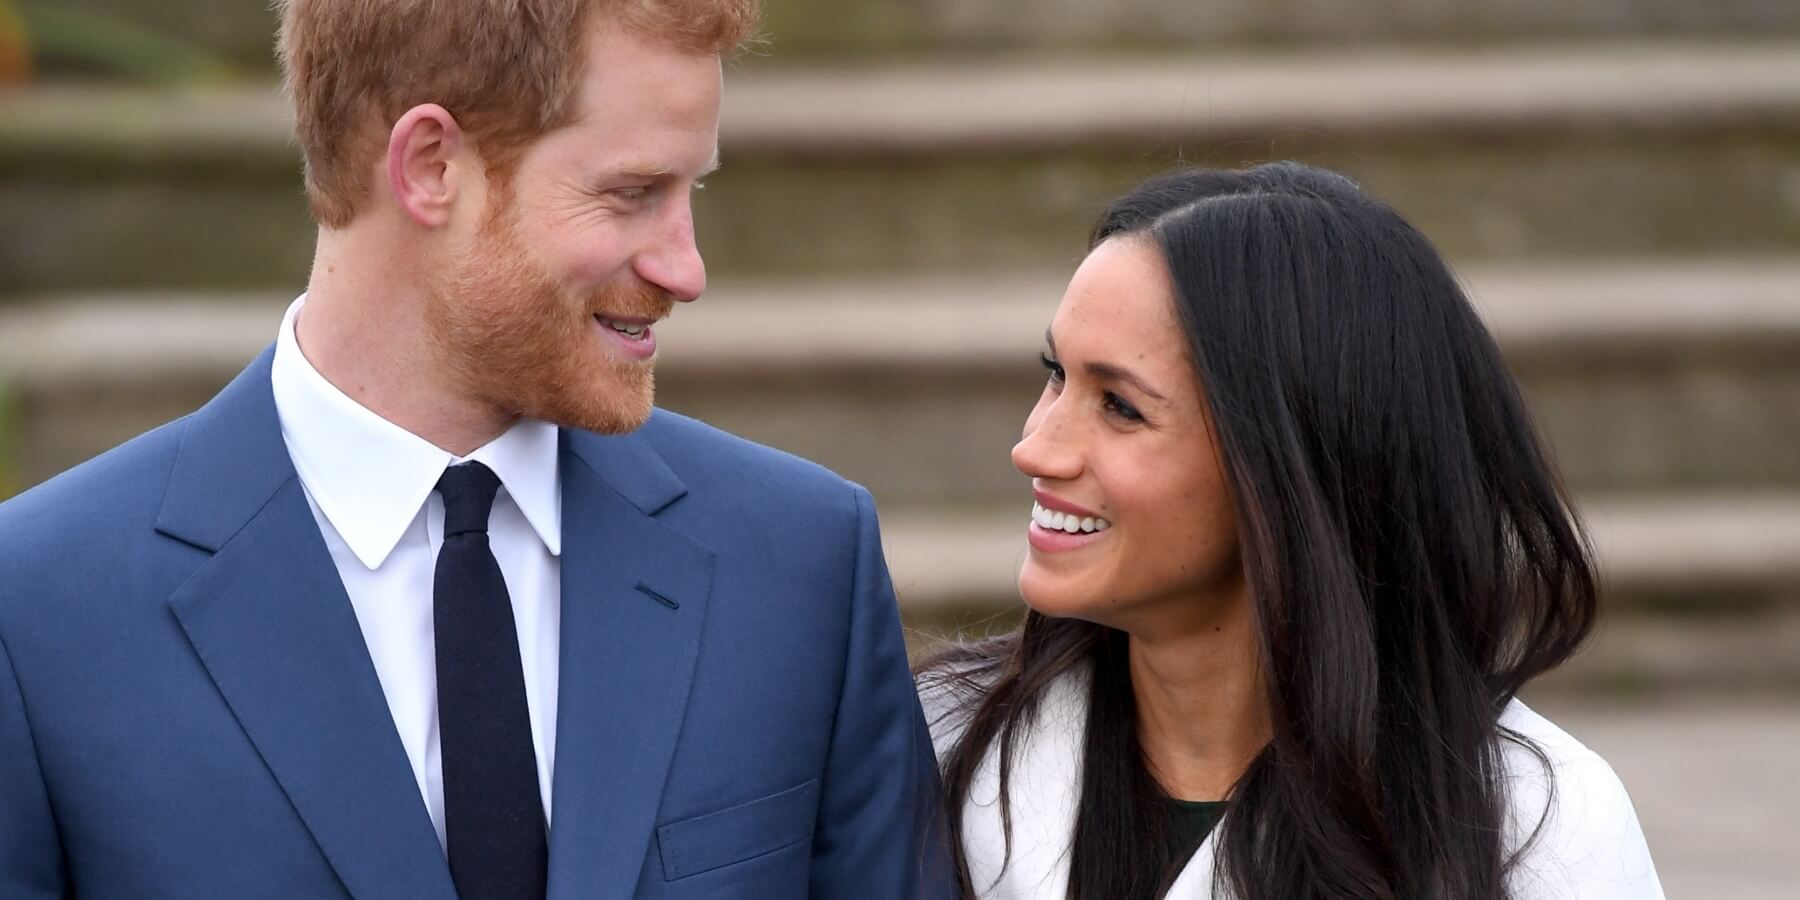 Prince Harry and Meghan Markle photographed for their engagement in 2017